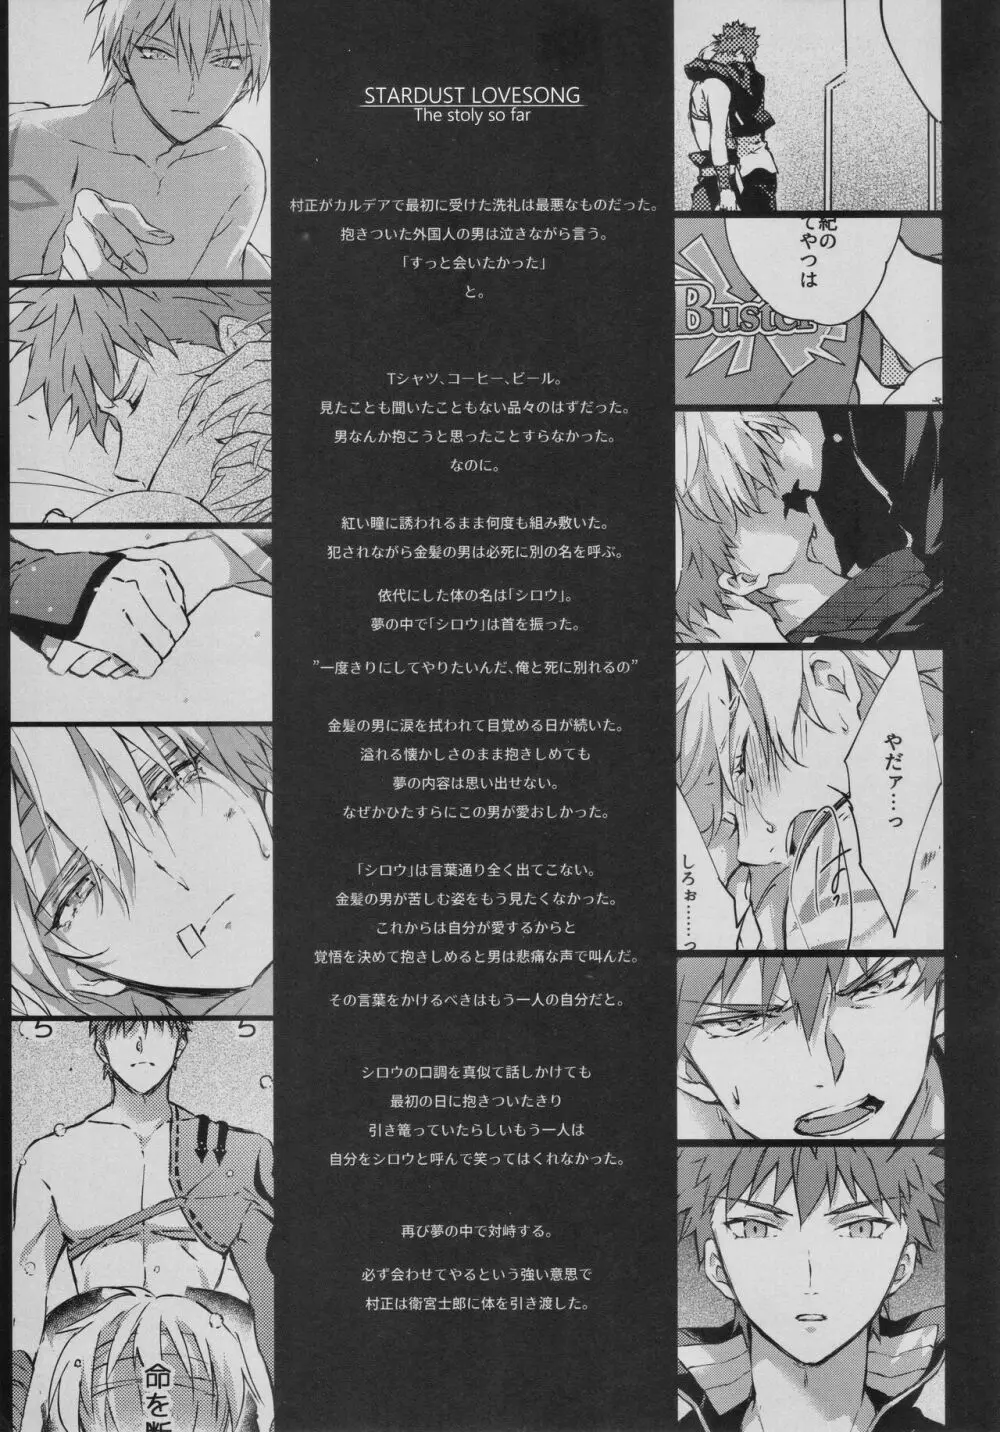 STARDUST LOVESONG encore special story 1st After 7 Days Page.8